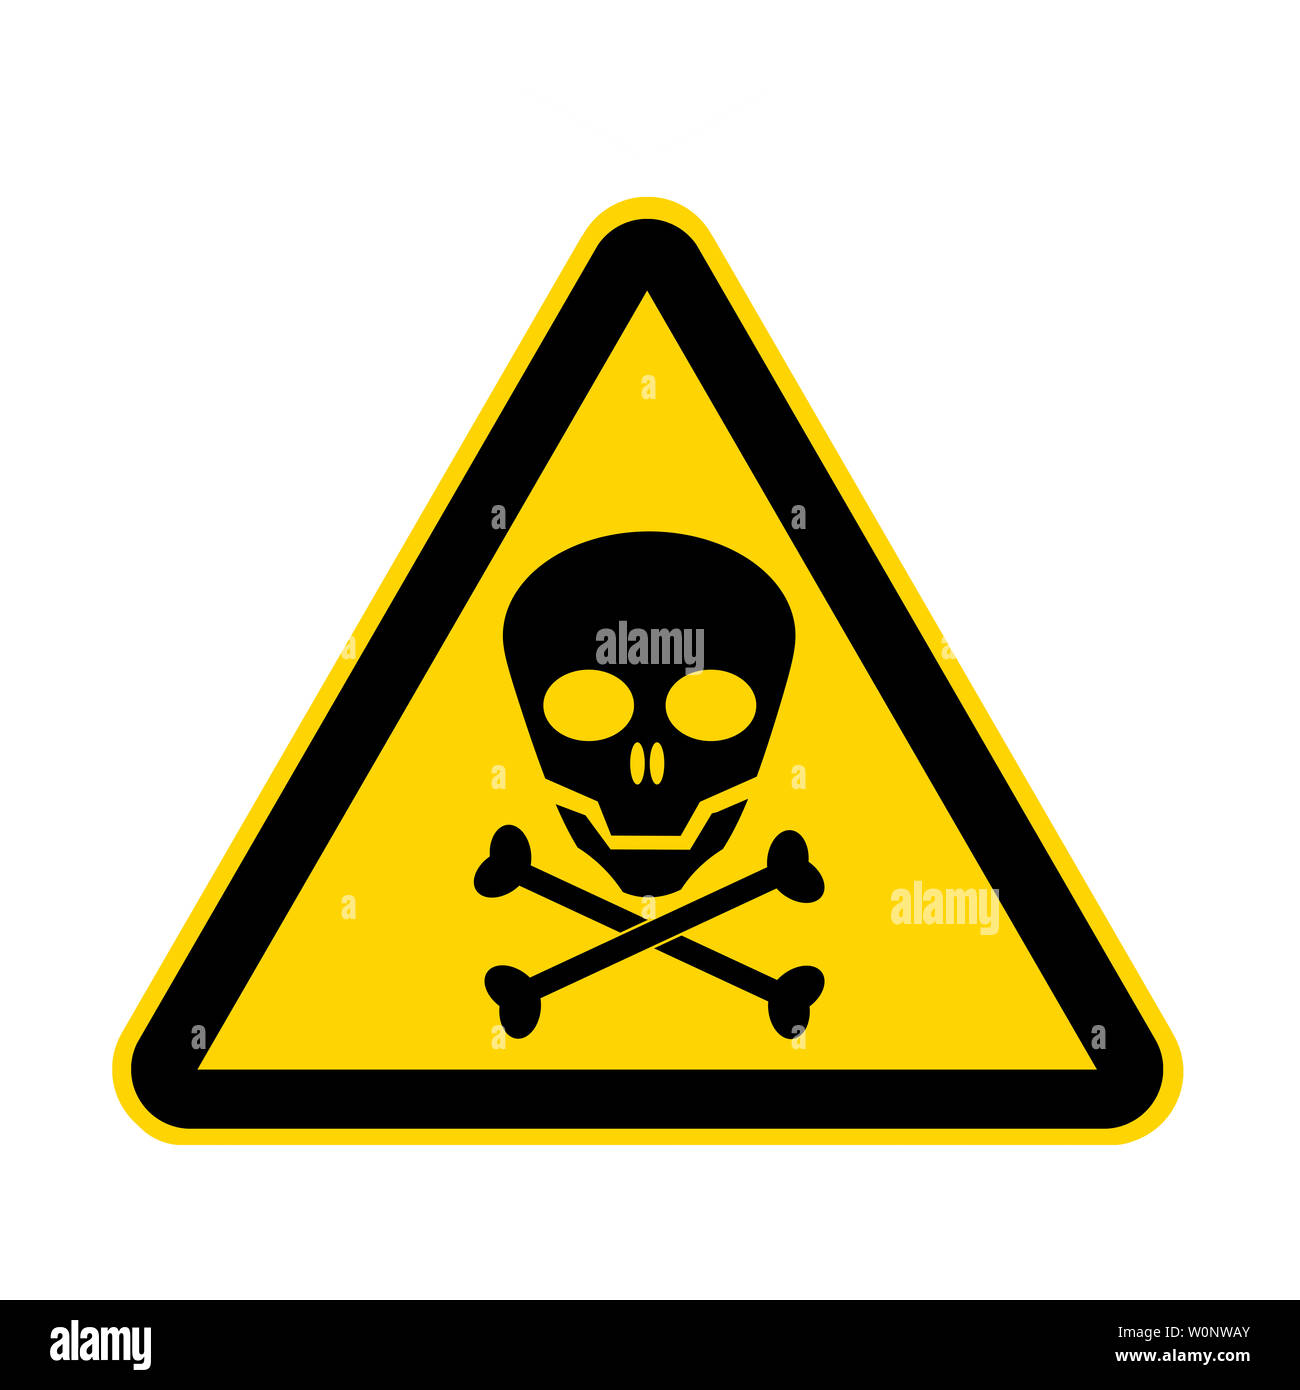 https://c8.alamy.com/comp/W0NWAY/a-skull-yellow-danger-sign-isolated-on-white-with-clipping-path-W0NWAY.jpg